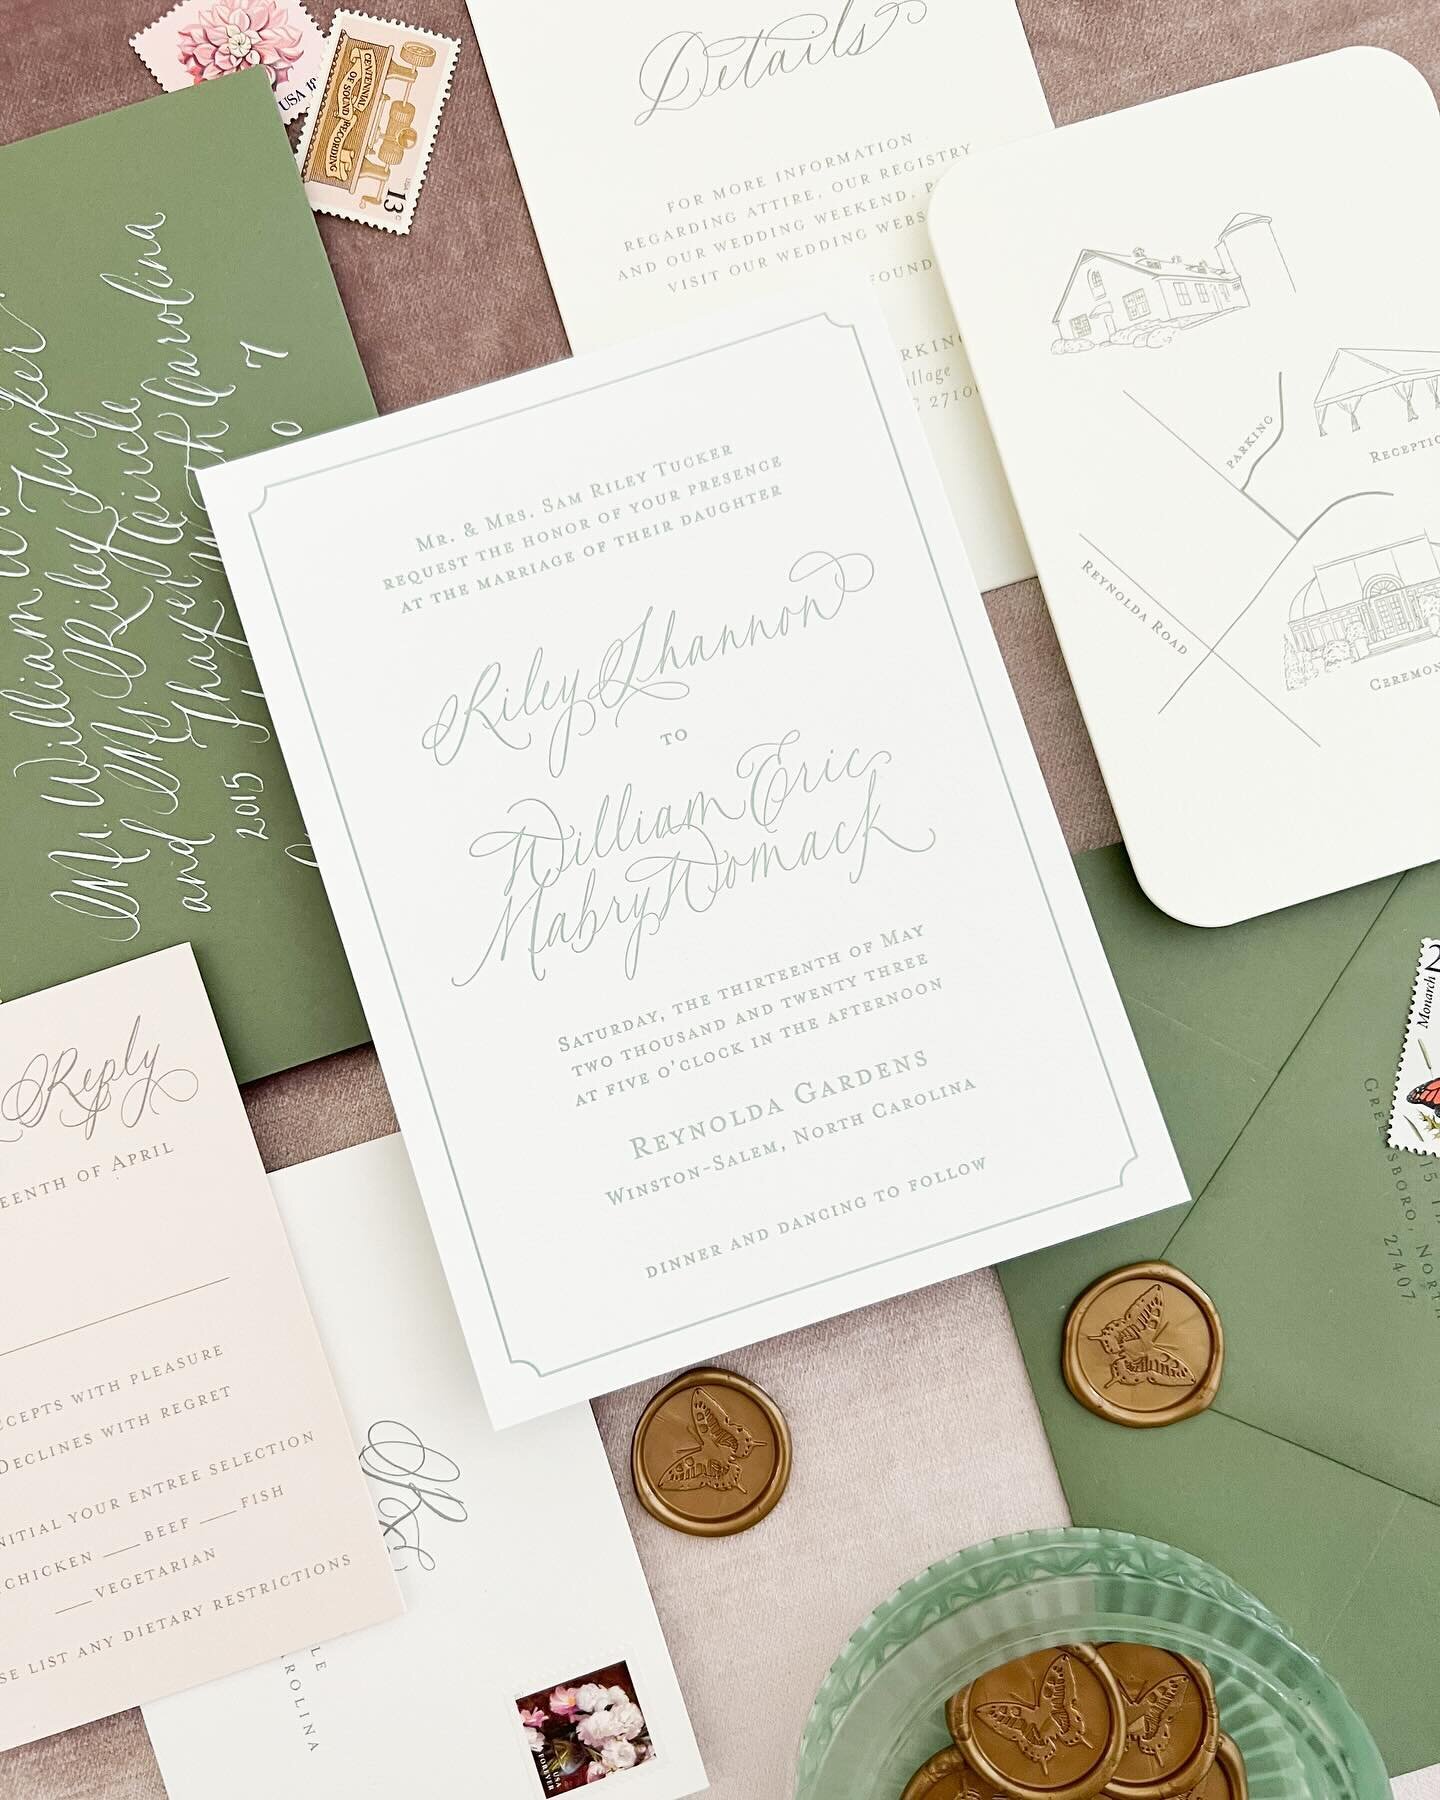 Walking down memory lane today. Came across Riley&rsquo;s invite cleaning our studio and her sage green letterpress is one to remember &lt;💚&gt; 

.
#weddingday #weddingideas #weddingdetails #realwedding #southernwedding #weddingcalligraphy #brideto